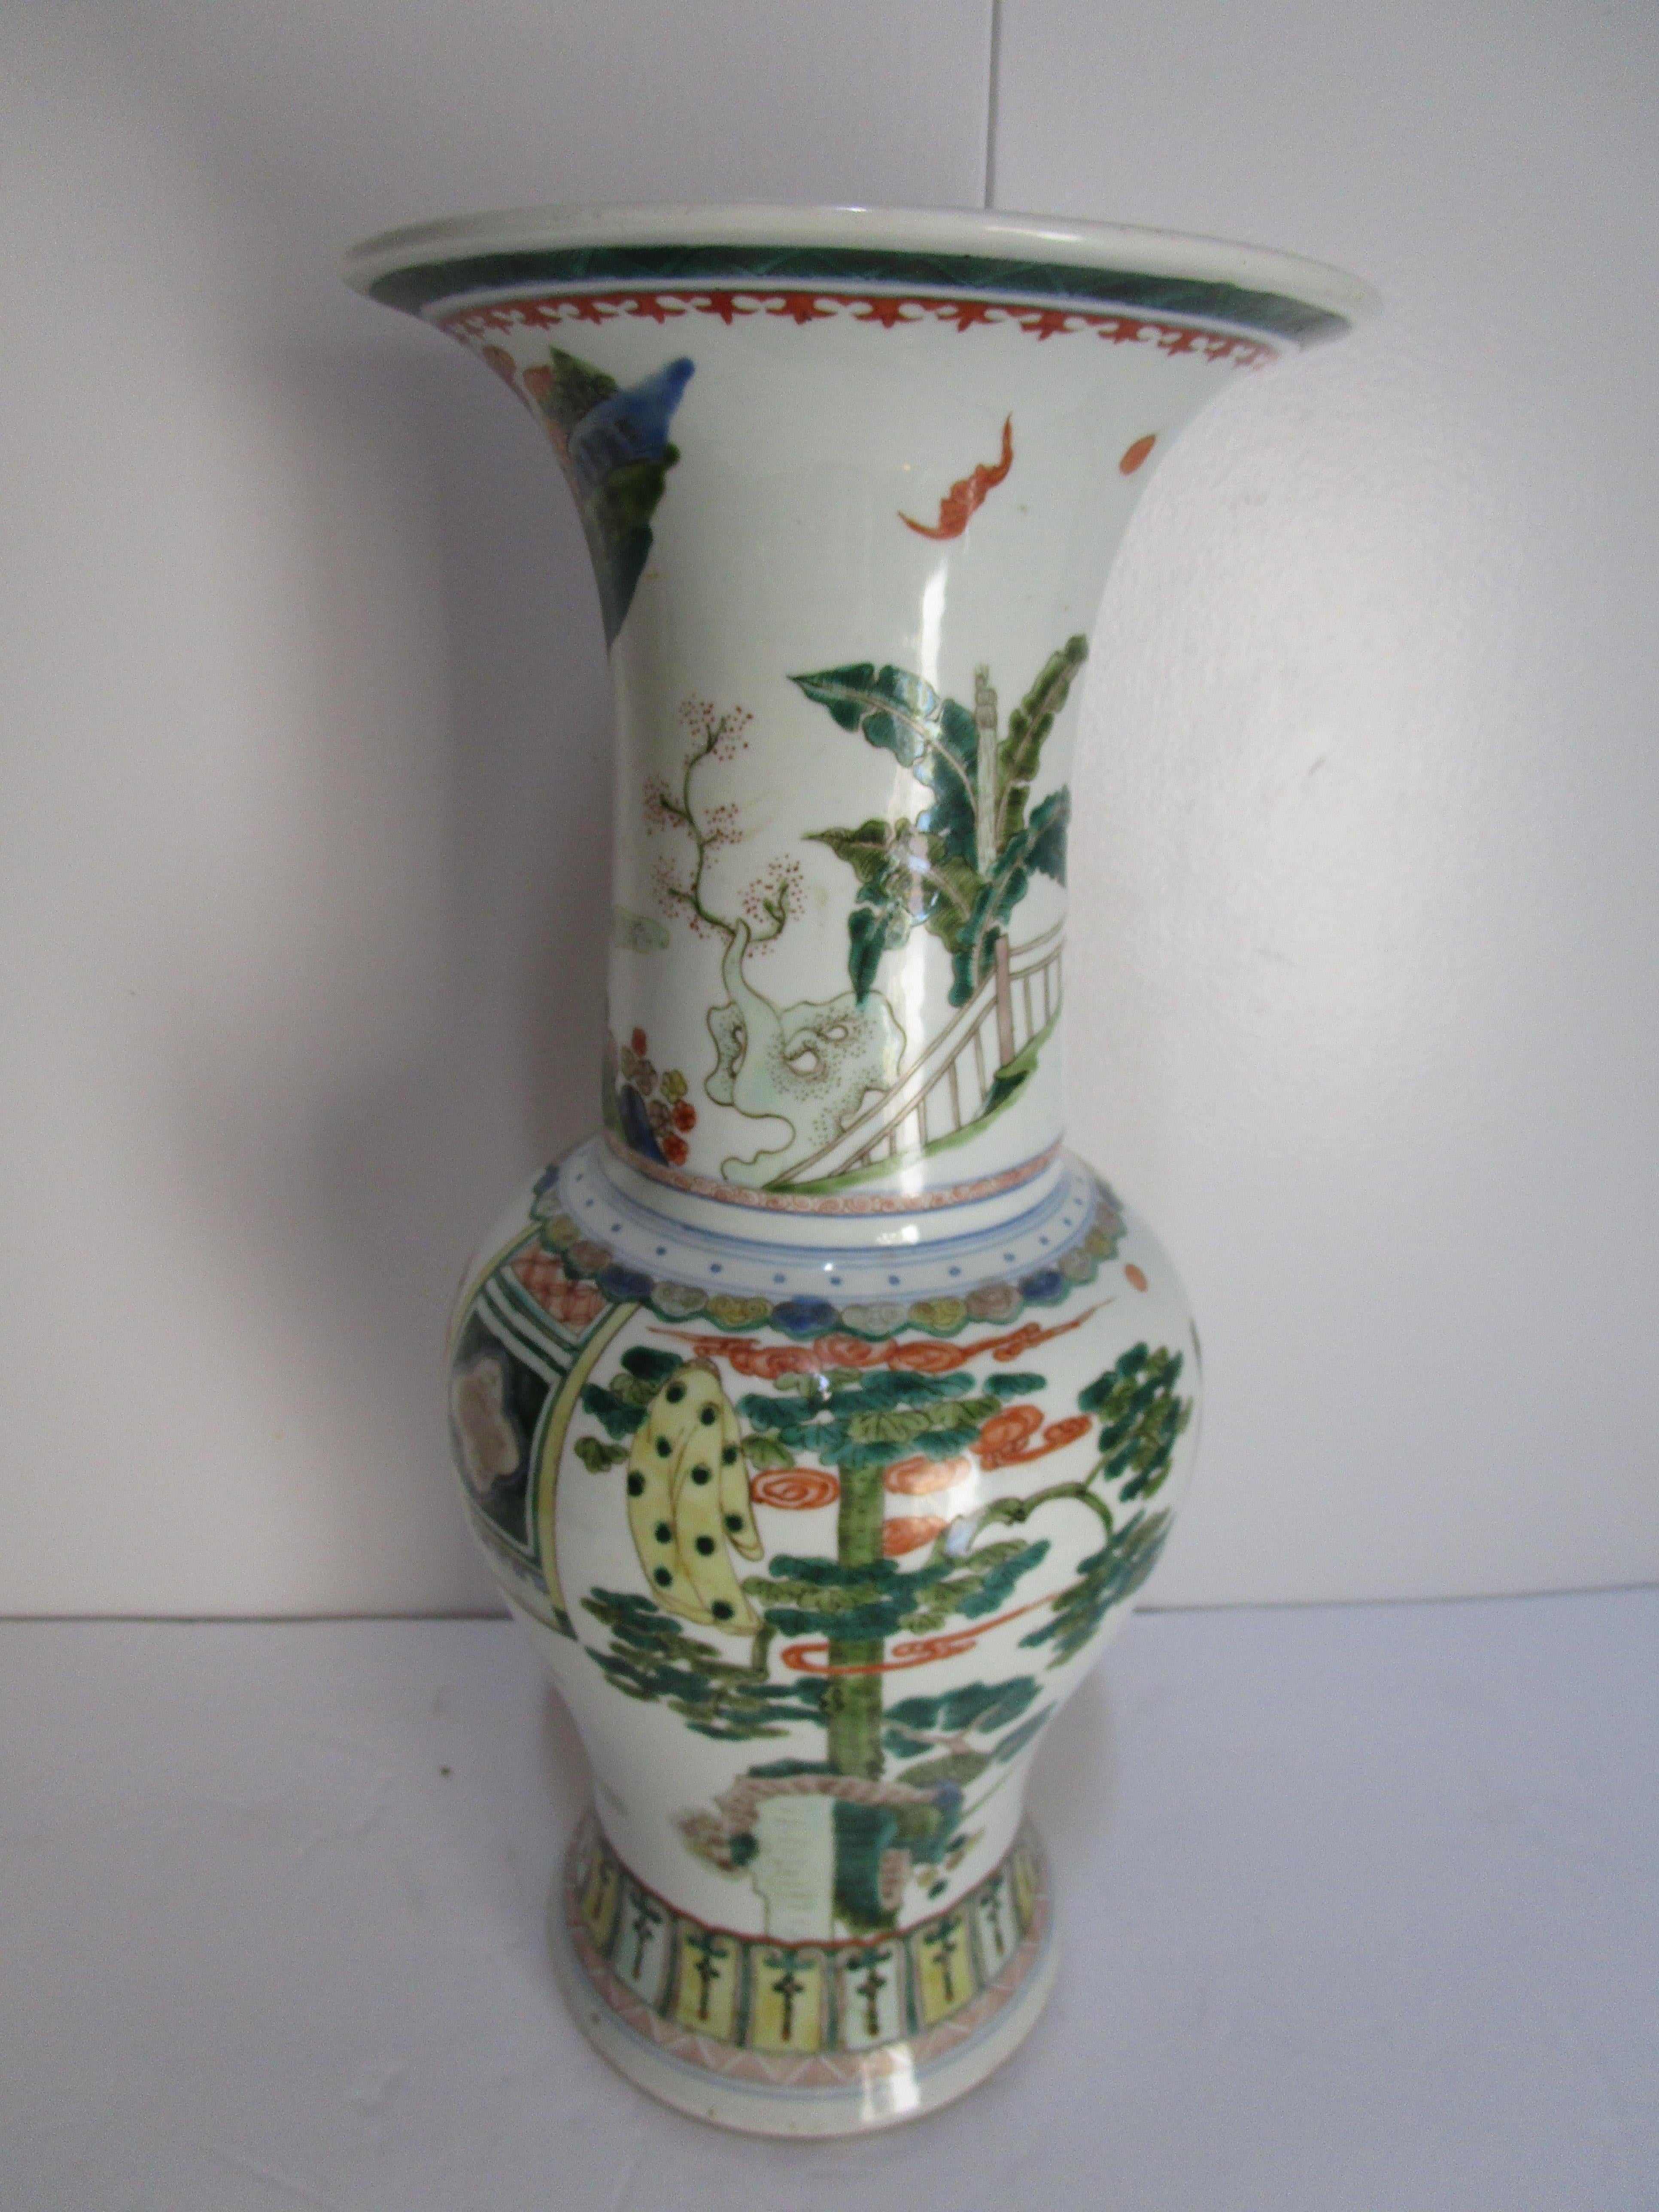 The hand painting of this vase is intricate and detailed  and is typical of
a Maebyeong or Korean Baluster vase, unsigned and unmarked, but based on the decorations, it looks mid 20th century, handmade and hand-painted. 
Korean baluster vases, also